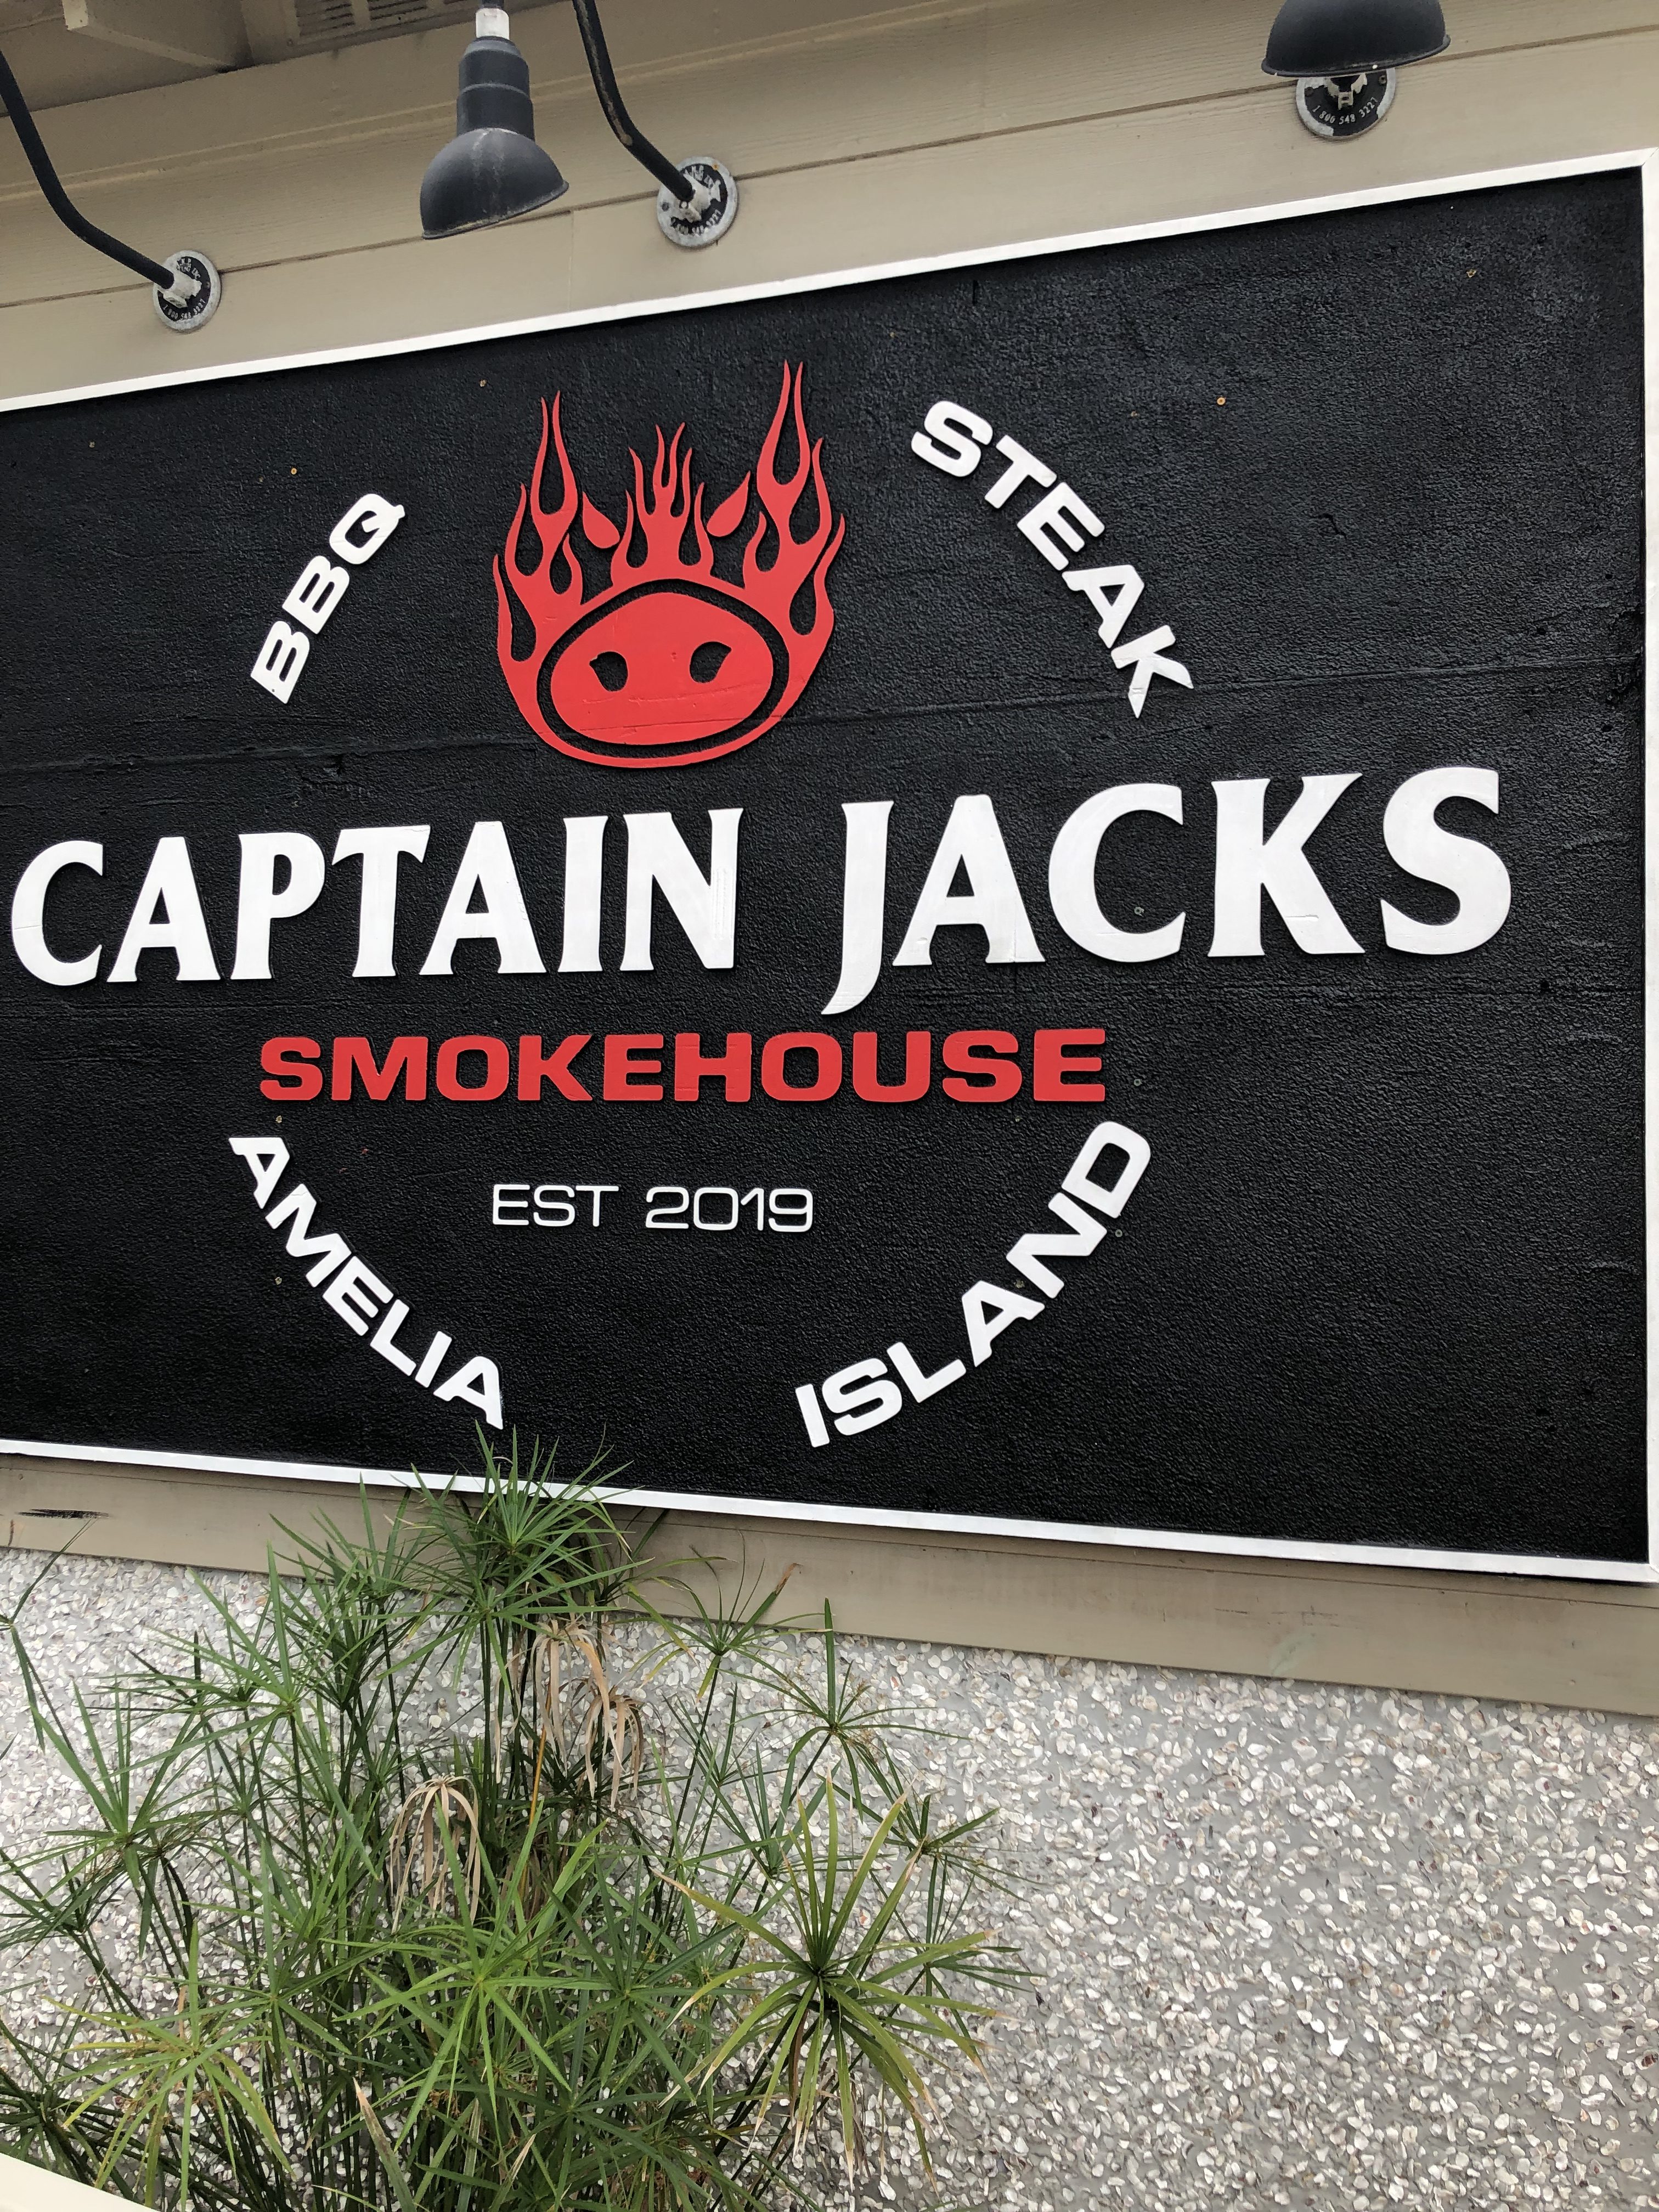 Captain Jacks Smokehouse Latest Addition To Growing Landscape Of Island BBQ Joints